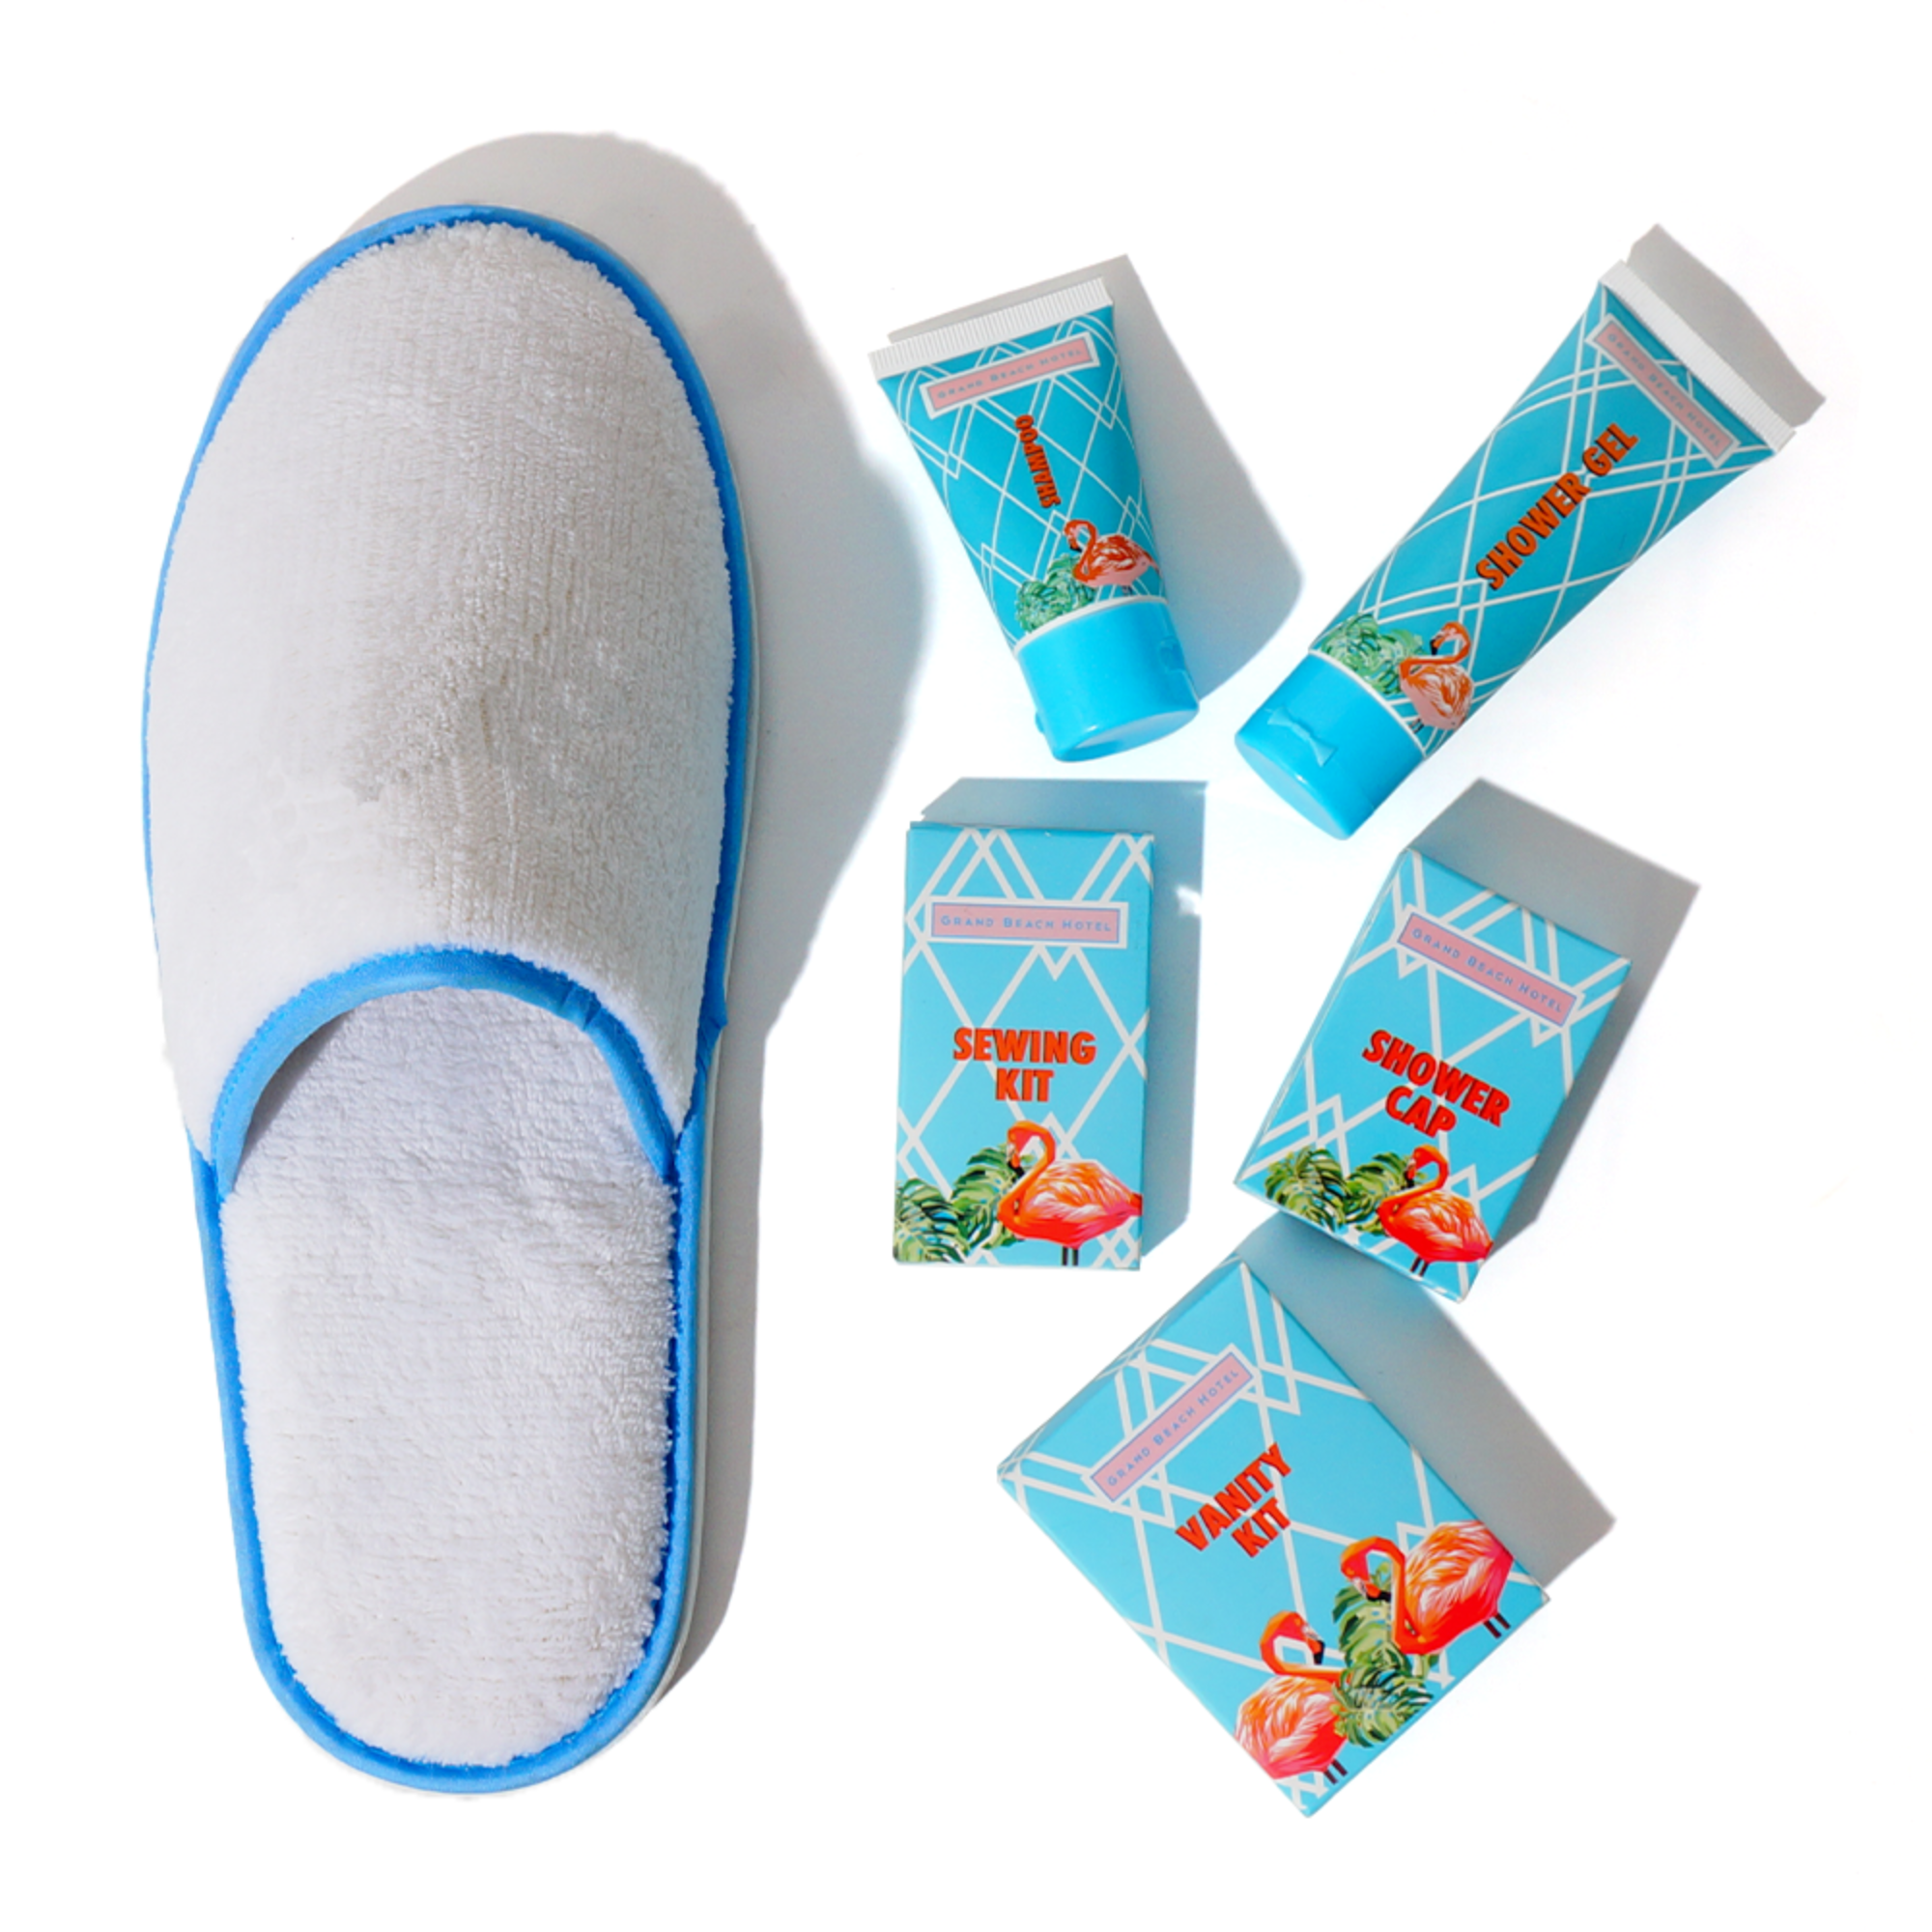 Wholesale Hotel Amenities Set Luxury Customized Disposable Hotel Slippers And Soap 